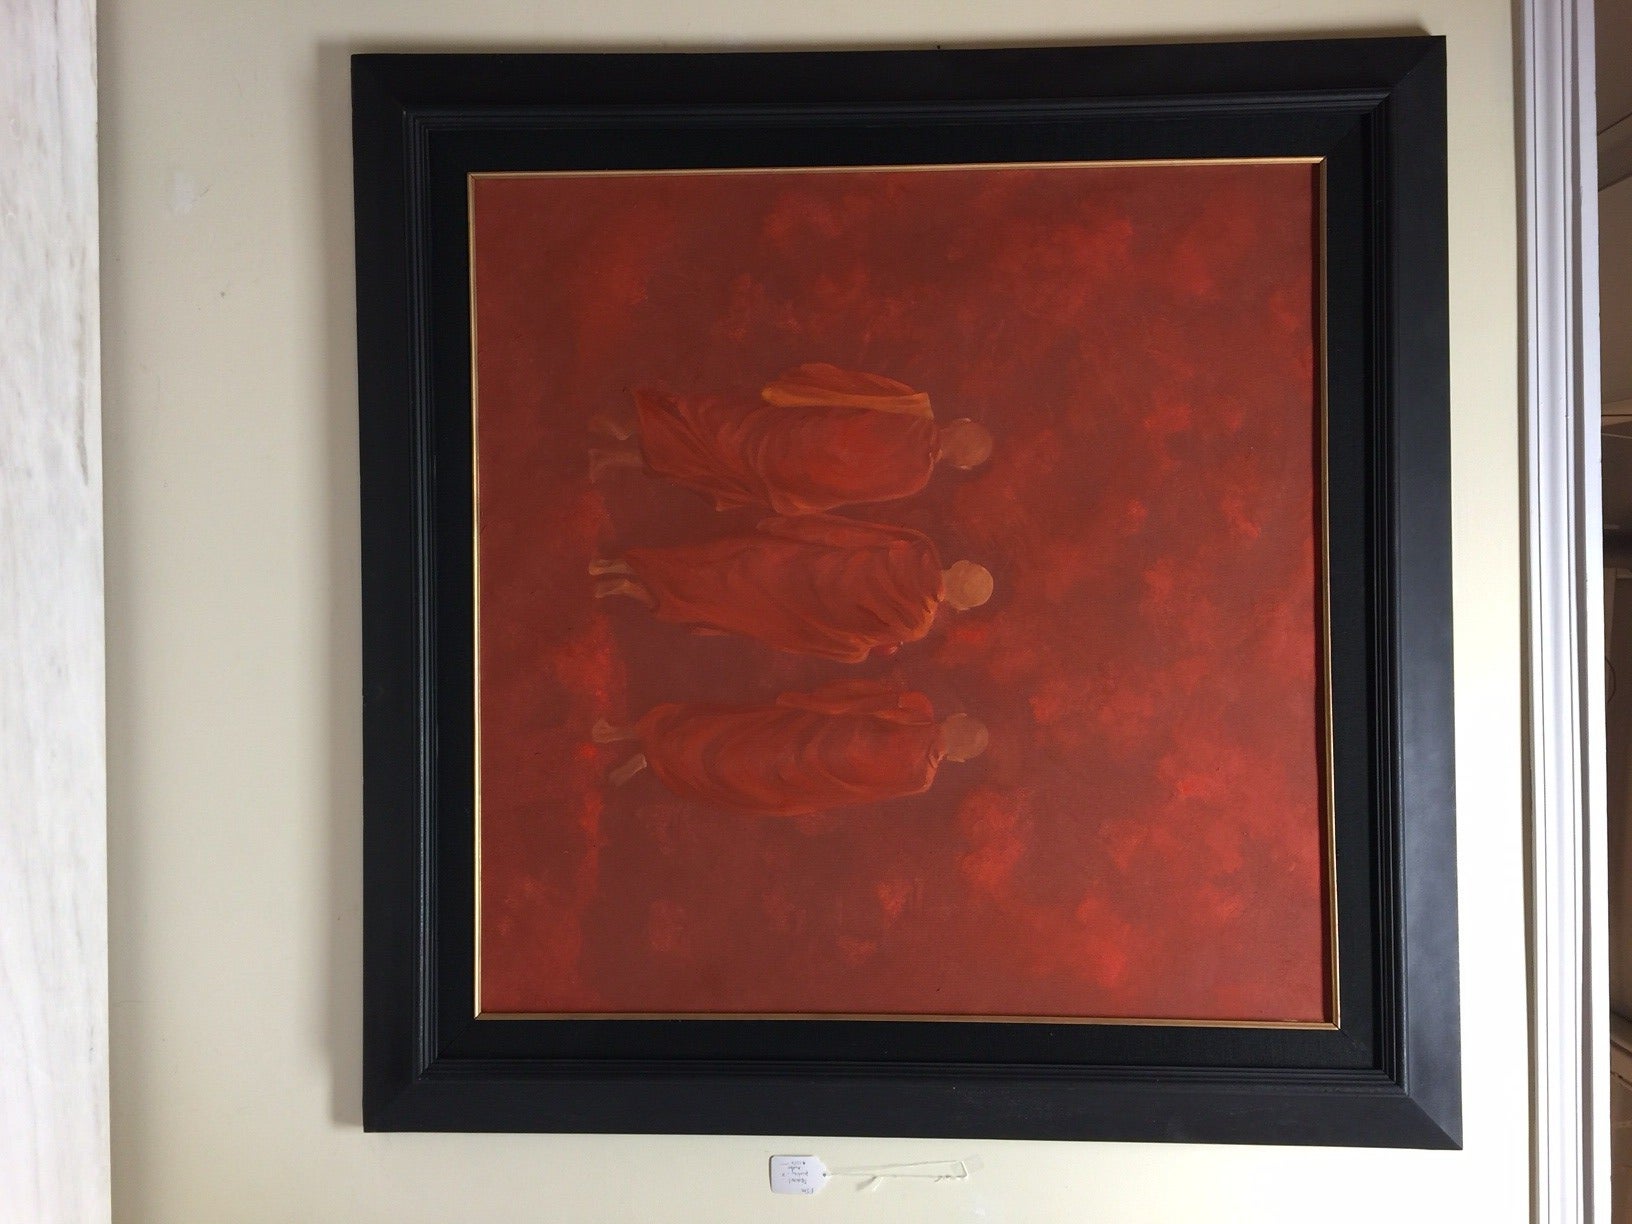 This large painting has amazing color and subtlety. The artist's name is unknown to me, but it is signed with a Chinese character. The painting is framed in wood, matted with a linen liner and a gold toned interior liner.